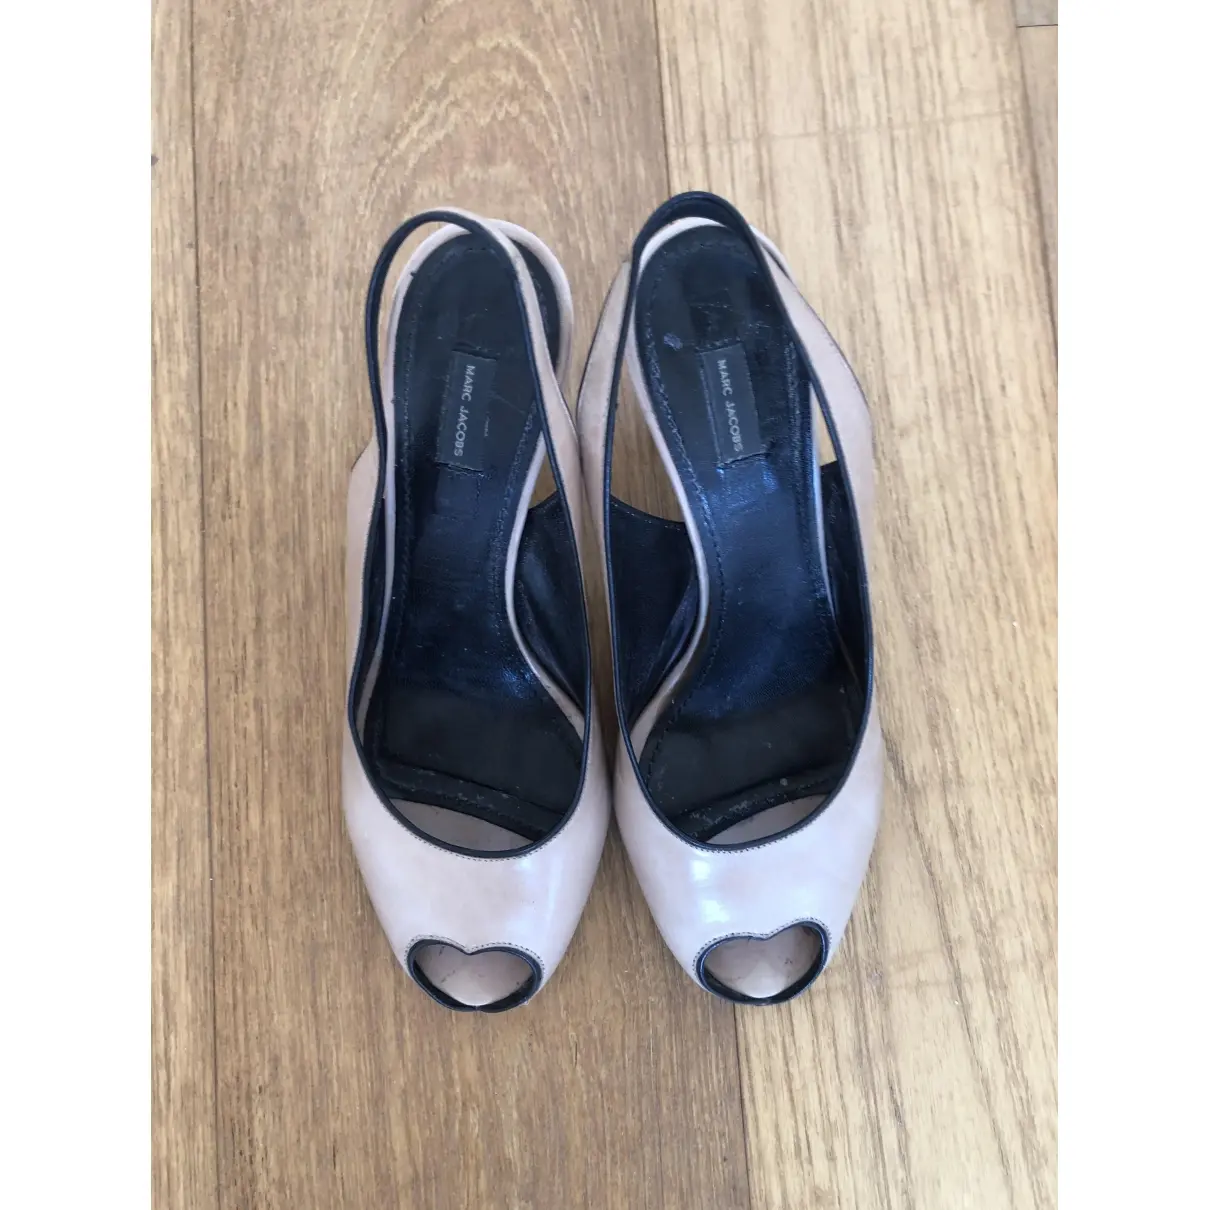 Marc Jacobs Leather sandal for sale